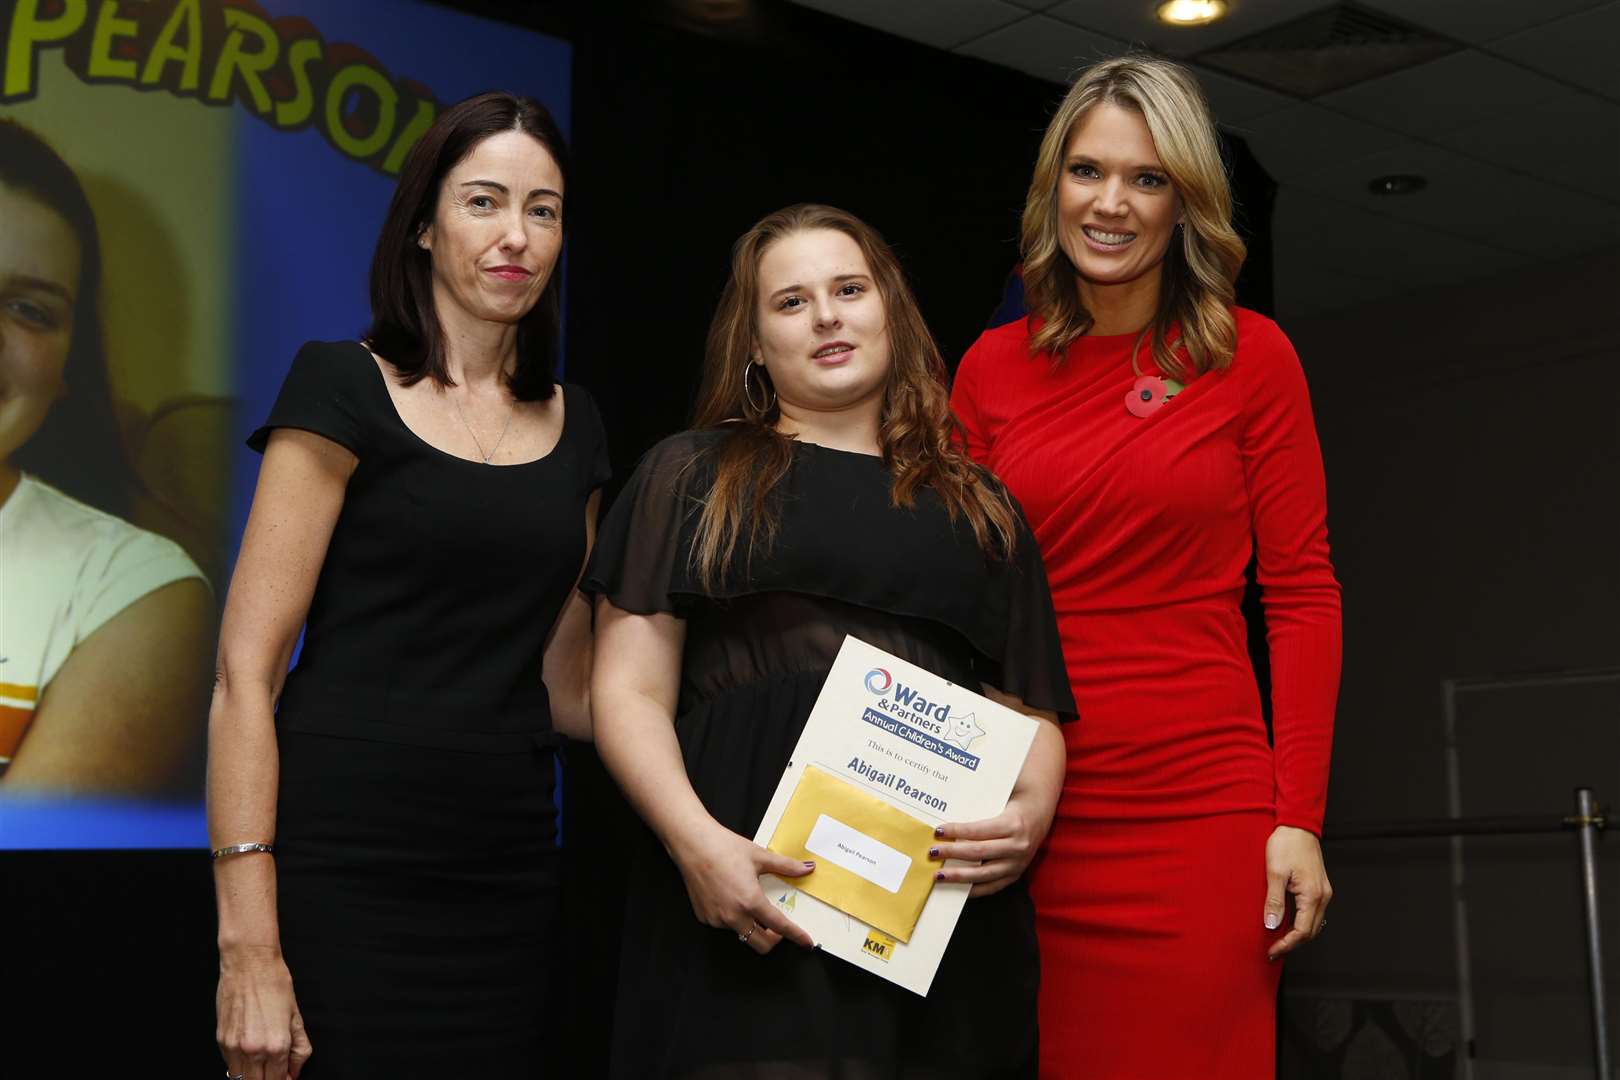 Katrina Newick collecting the award for Exceptional Young Carer on behalf of Abigail Pearson with Senior Operations Director for North Kent Sam Dalton and Charlotte Hawkins. Picture: Andy Jones